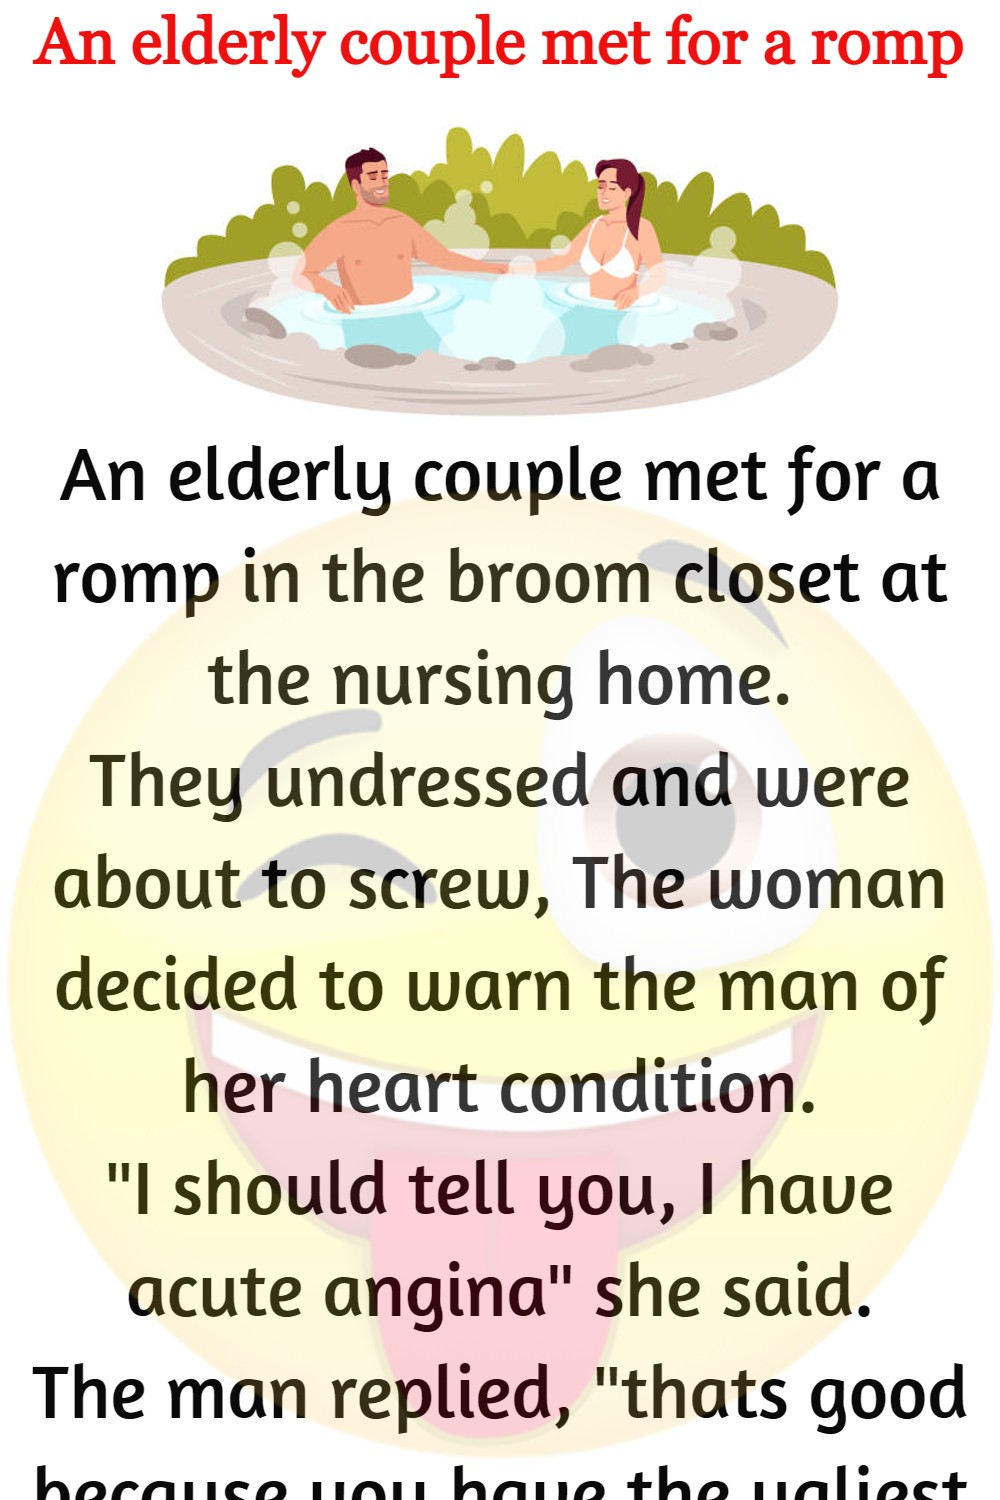 An elderly couple met for a romp